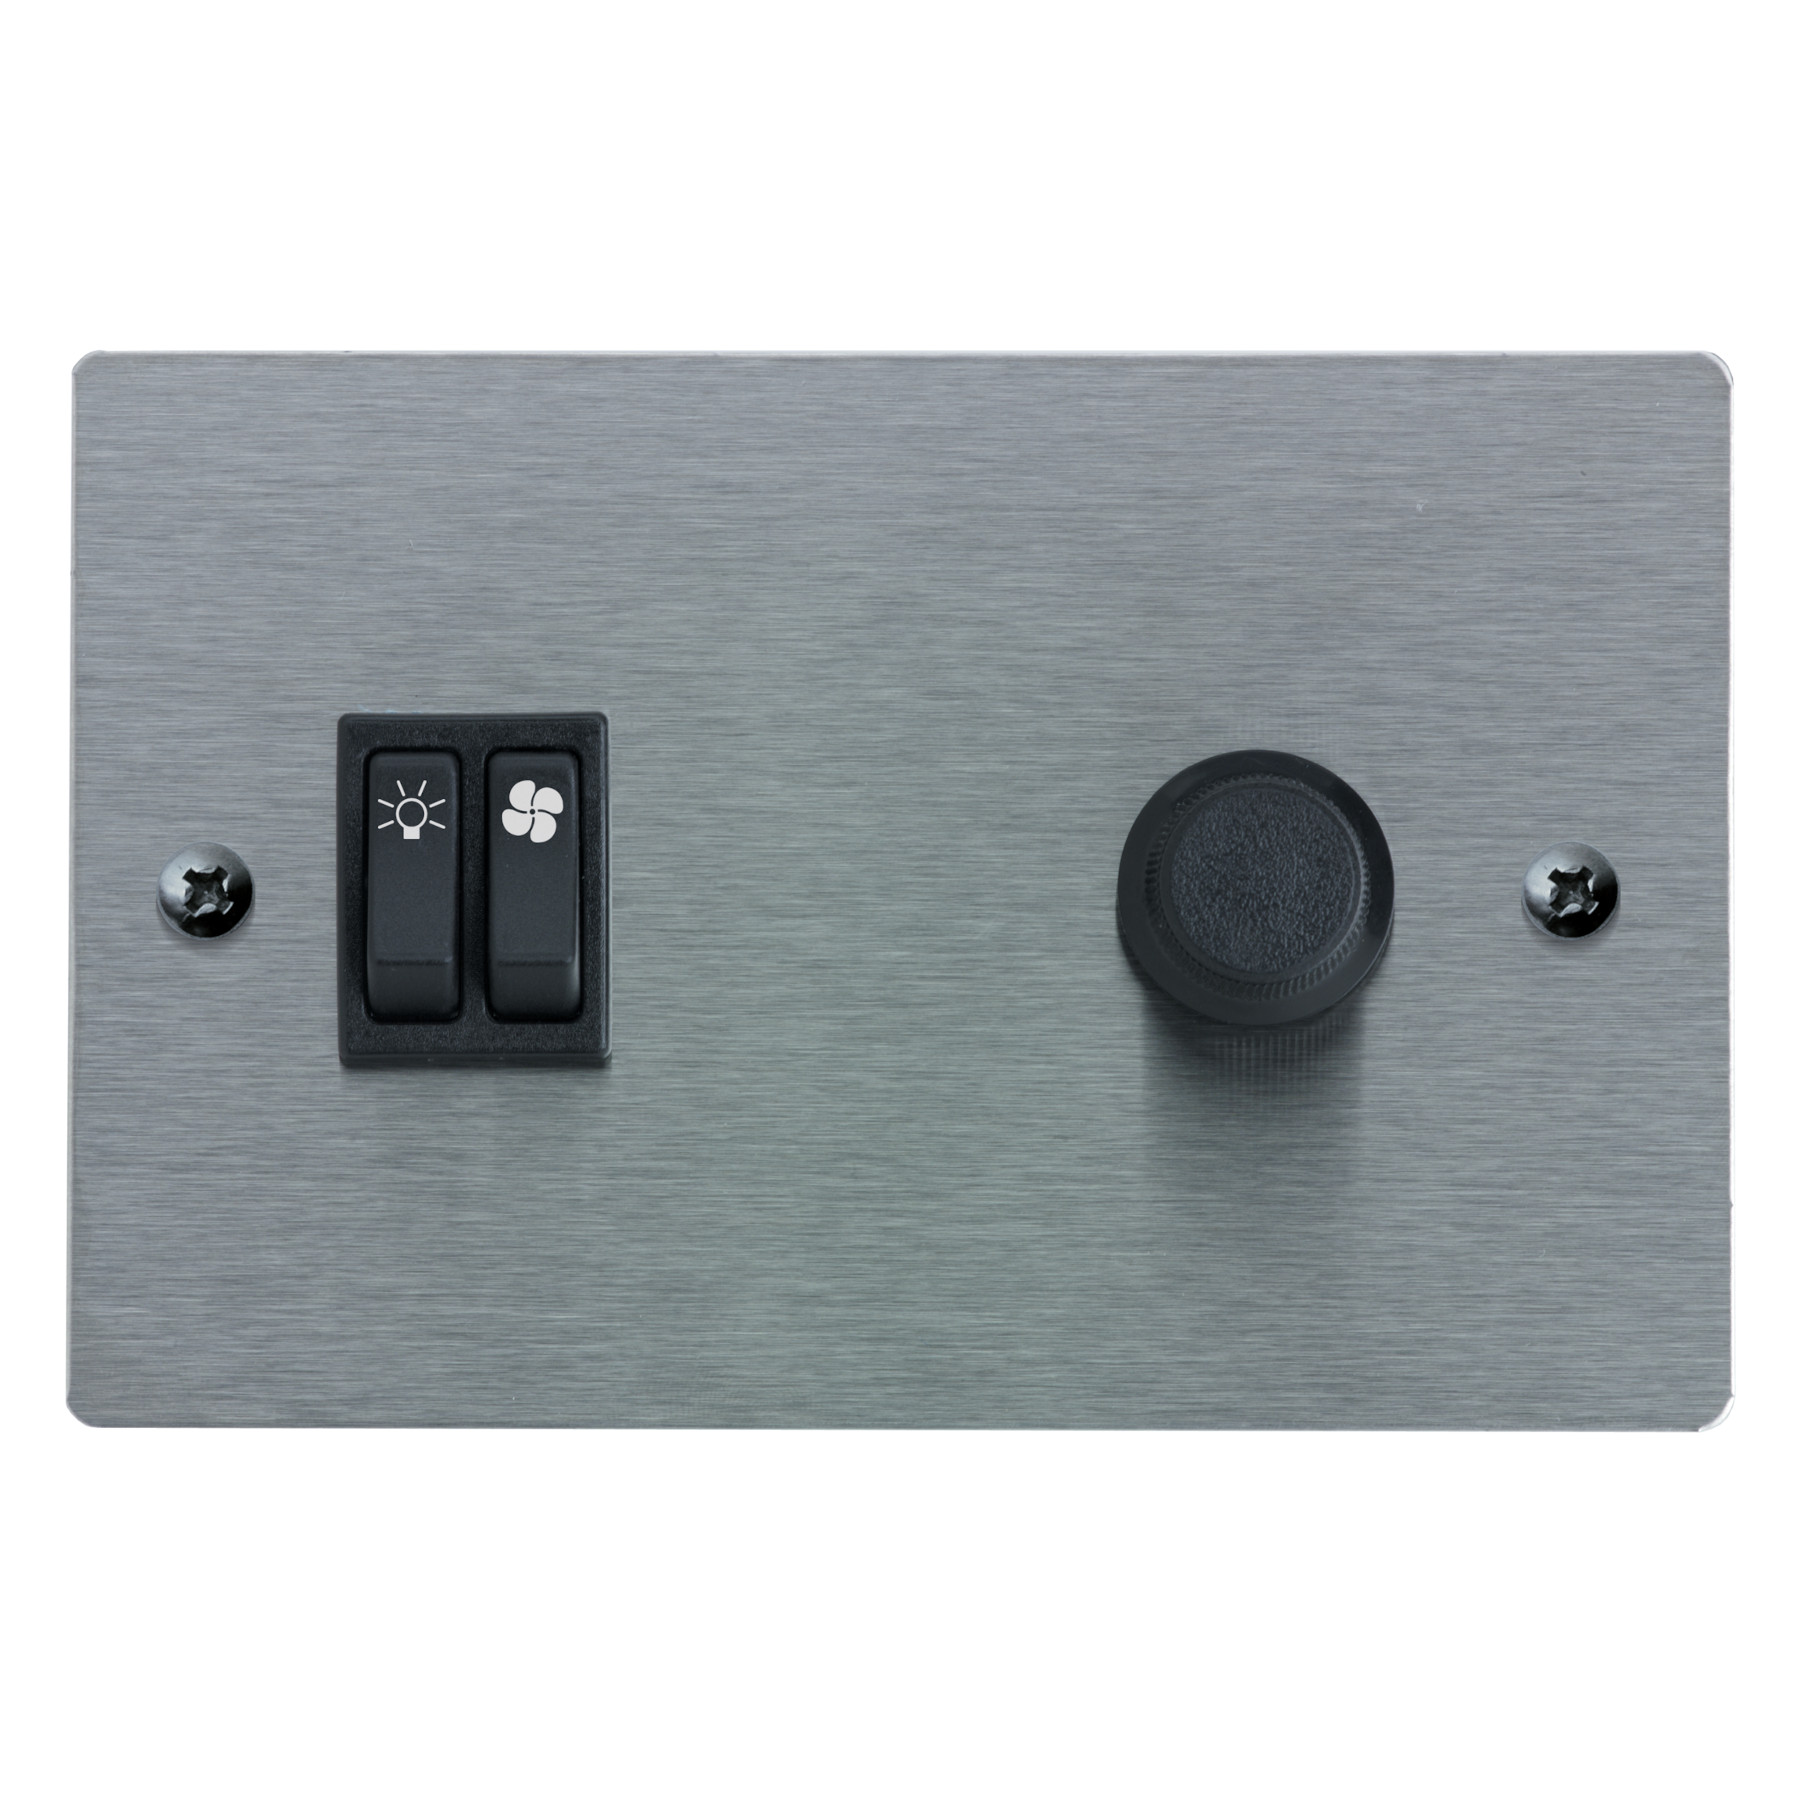 Optional Wall Control in Stainless Steel for use with Broan Pro-Style Insert range hoods